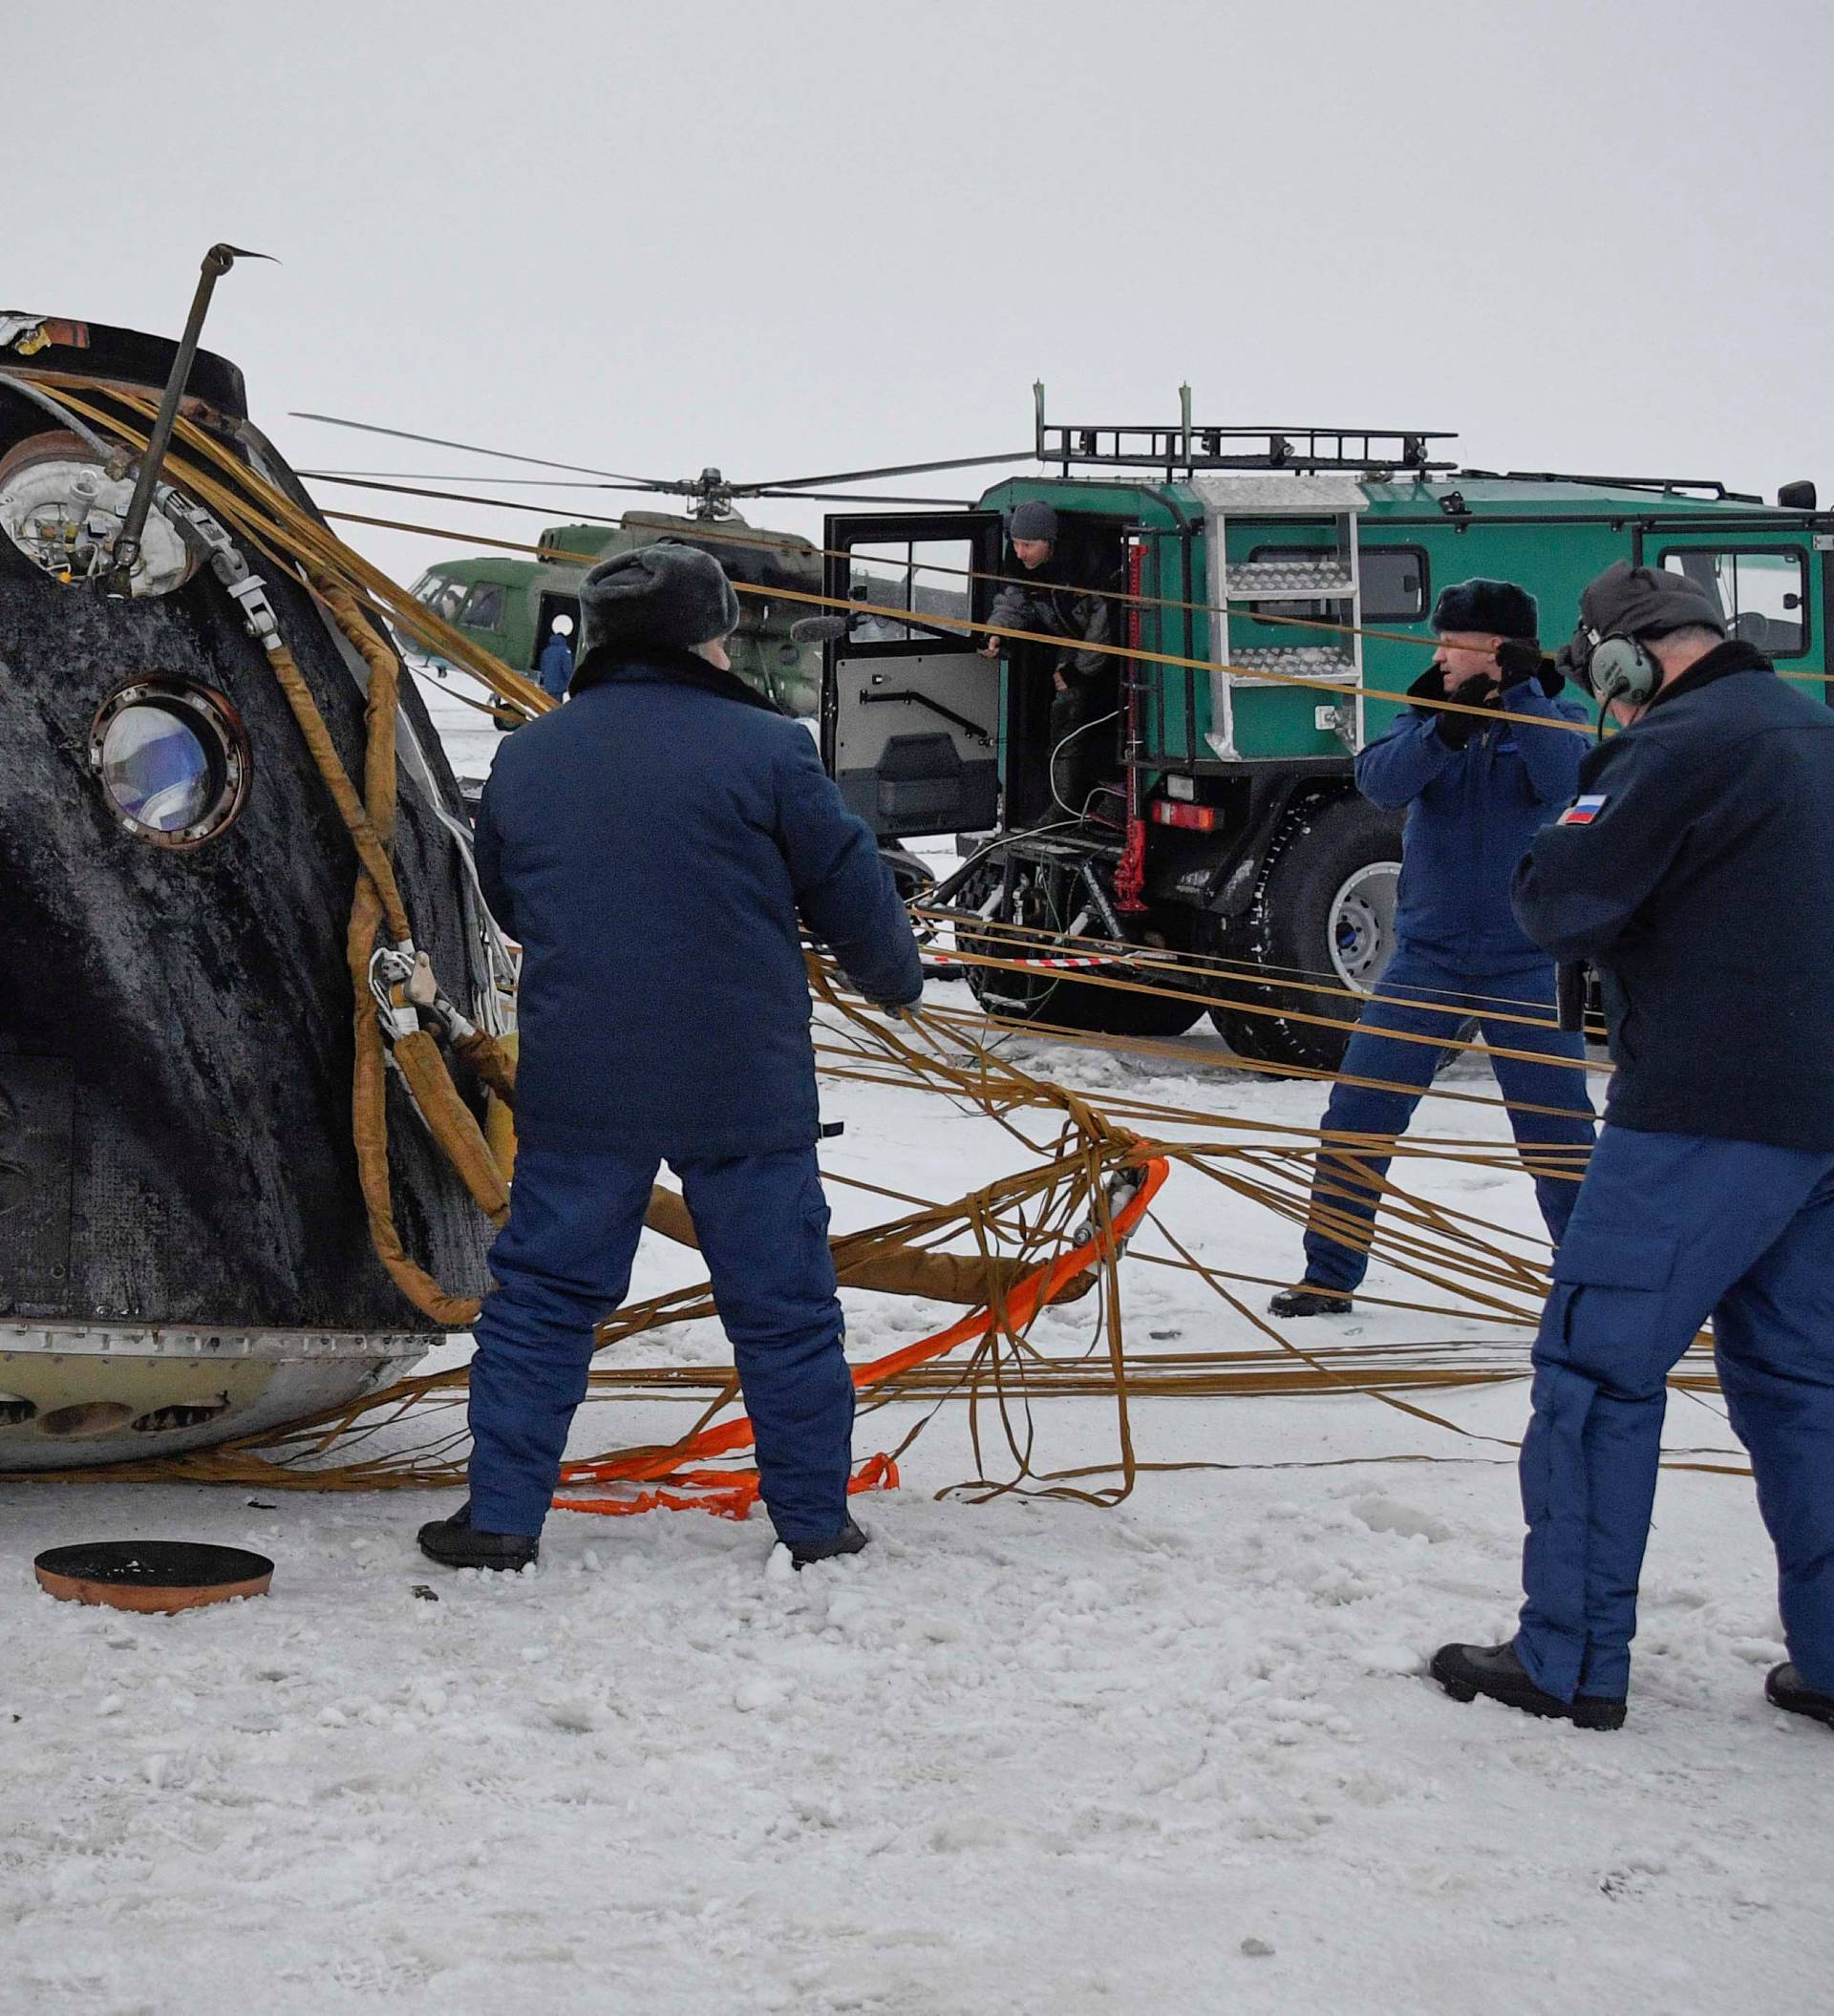 Search and rescue teams work at the site of the landing of the Soyuz MS-06 space capsule with International Space Station crew members in a remote area outside the town of Dzhezkazgan (Zhezkazgan), Kazakhstan